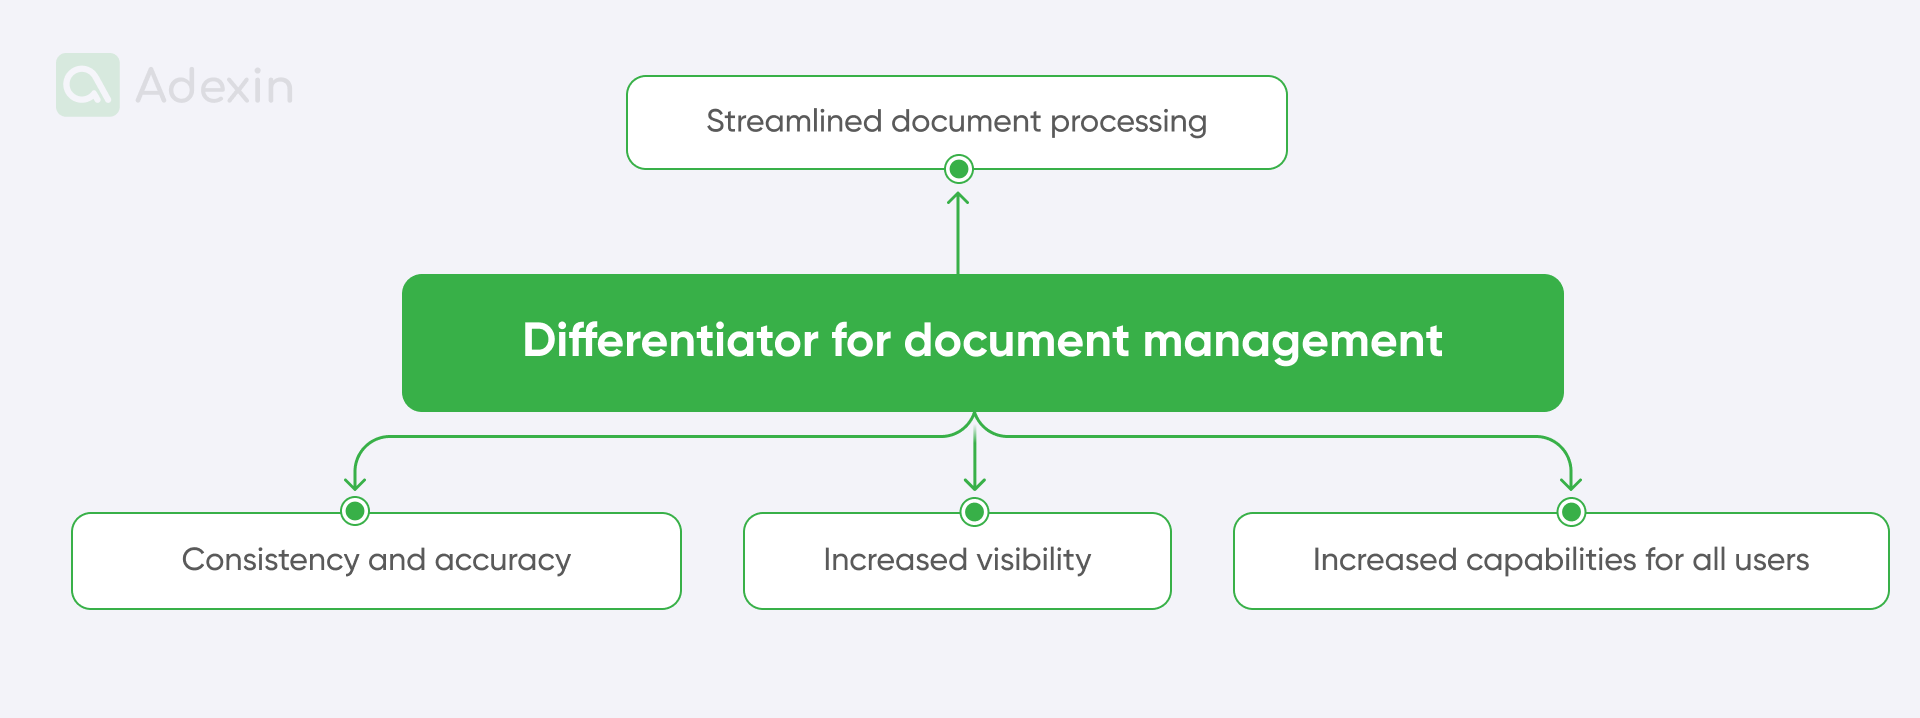 Differentiator for document management